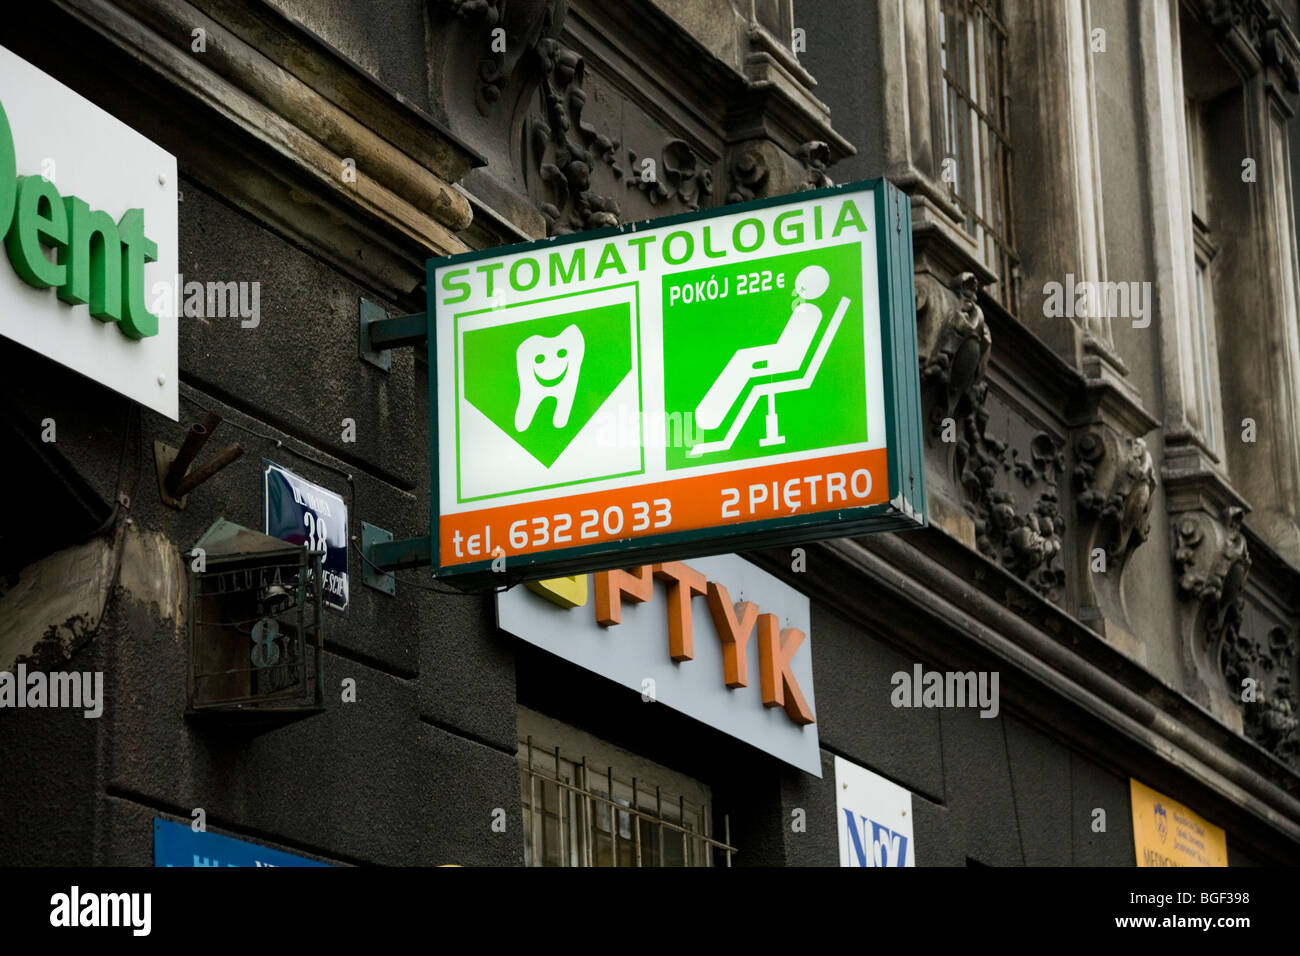 Street sign for a dentist / dental / dentristy  business offering treatment or repairs at a surgery / office in Krakow, Poland. Stock Photo